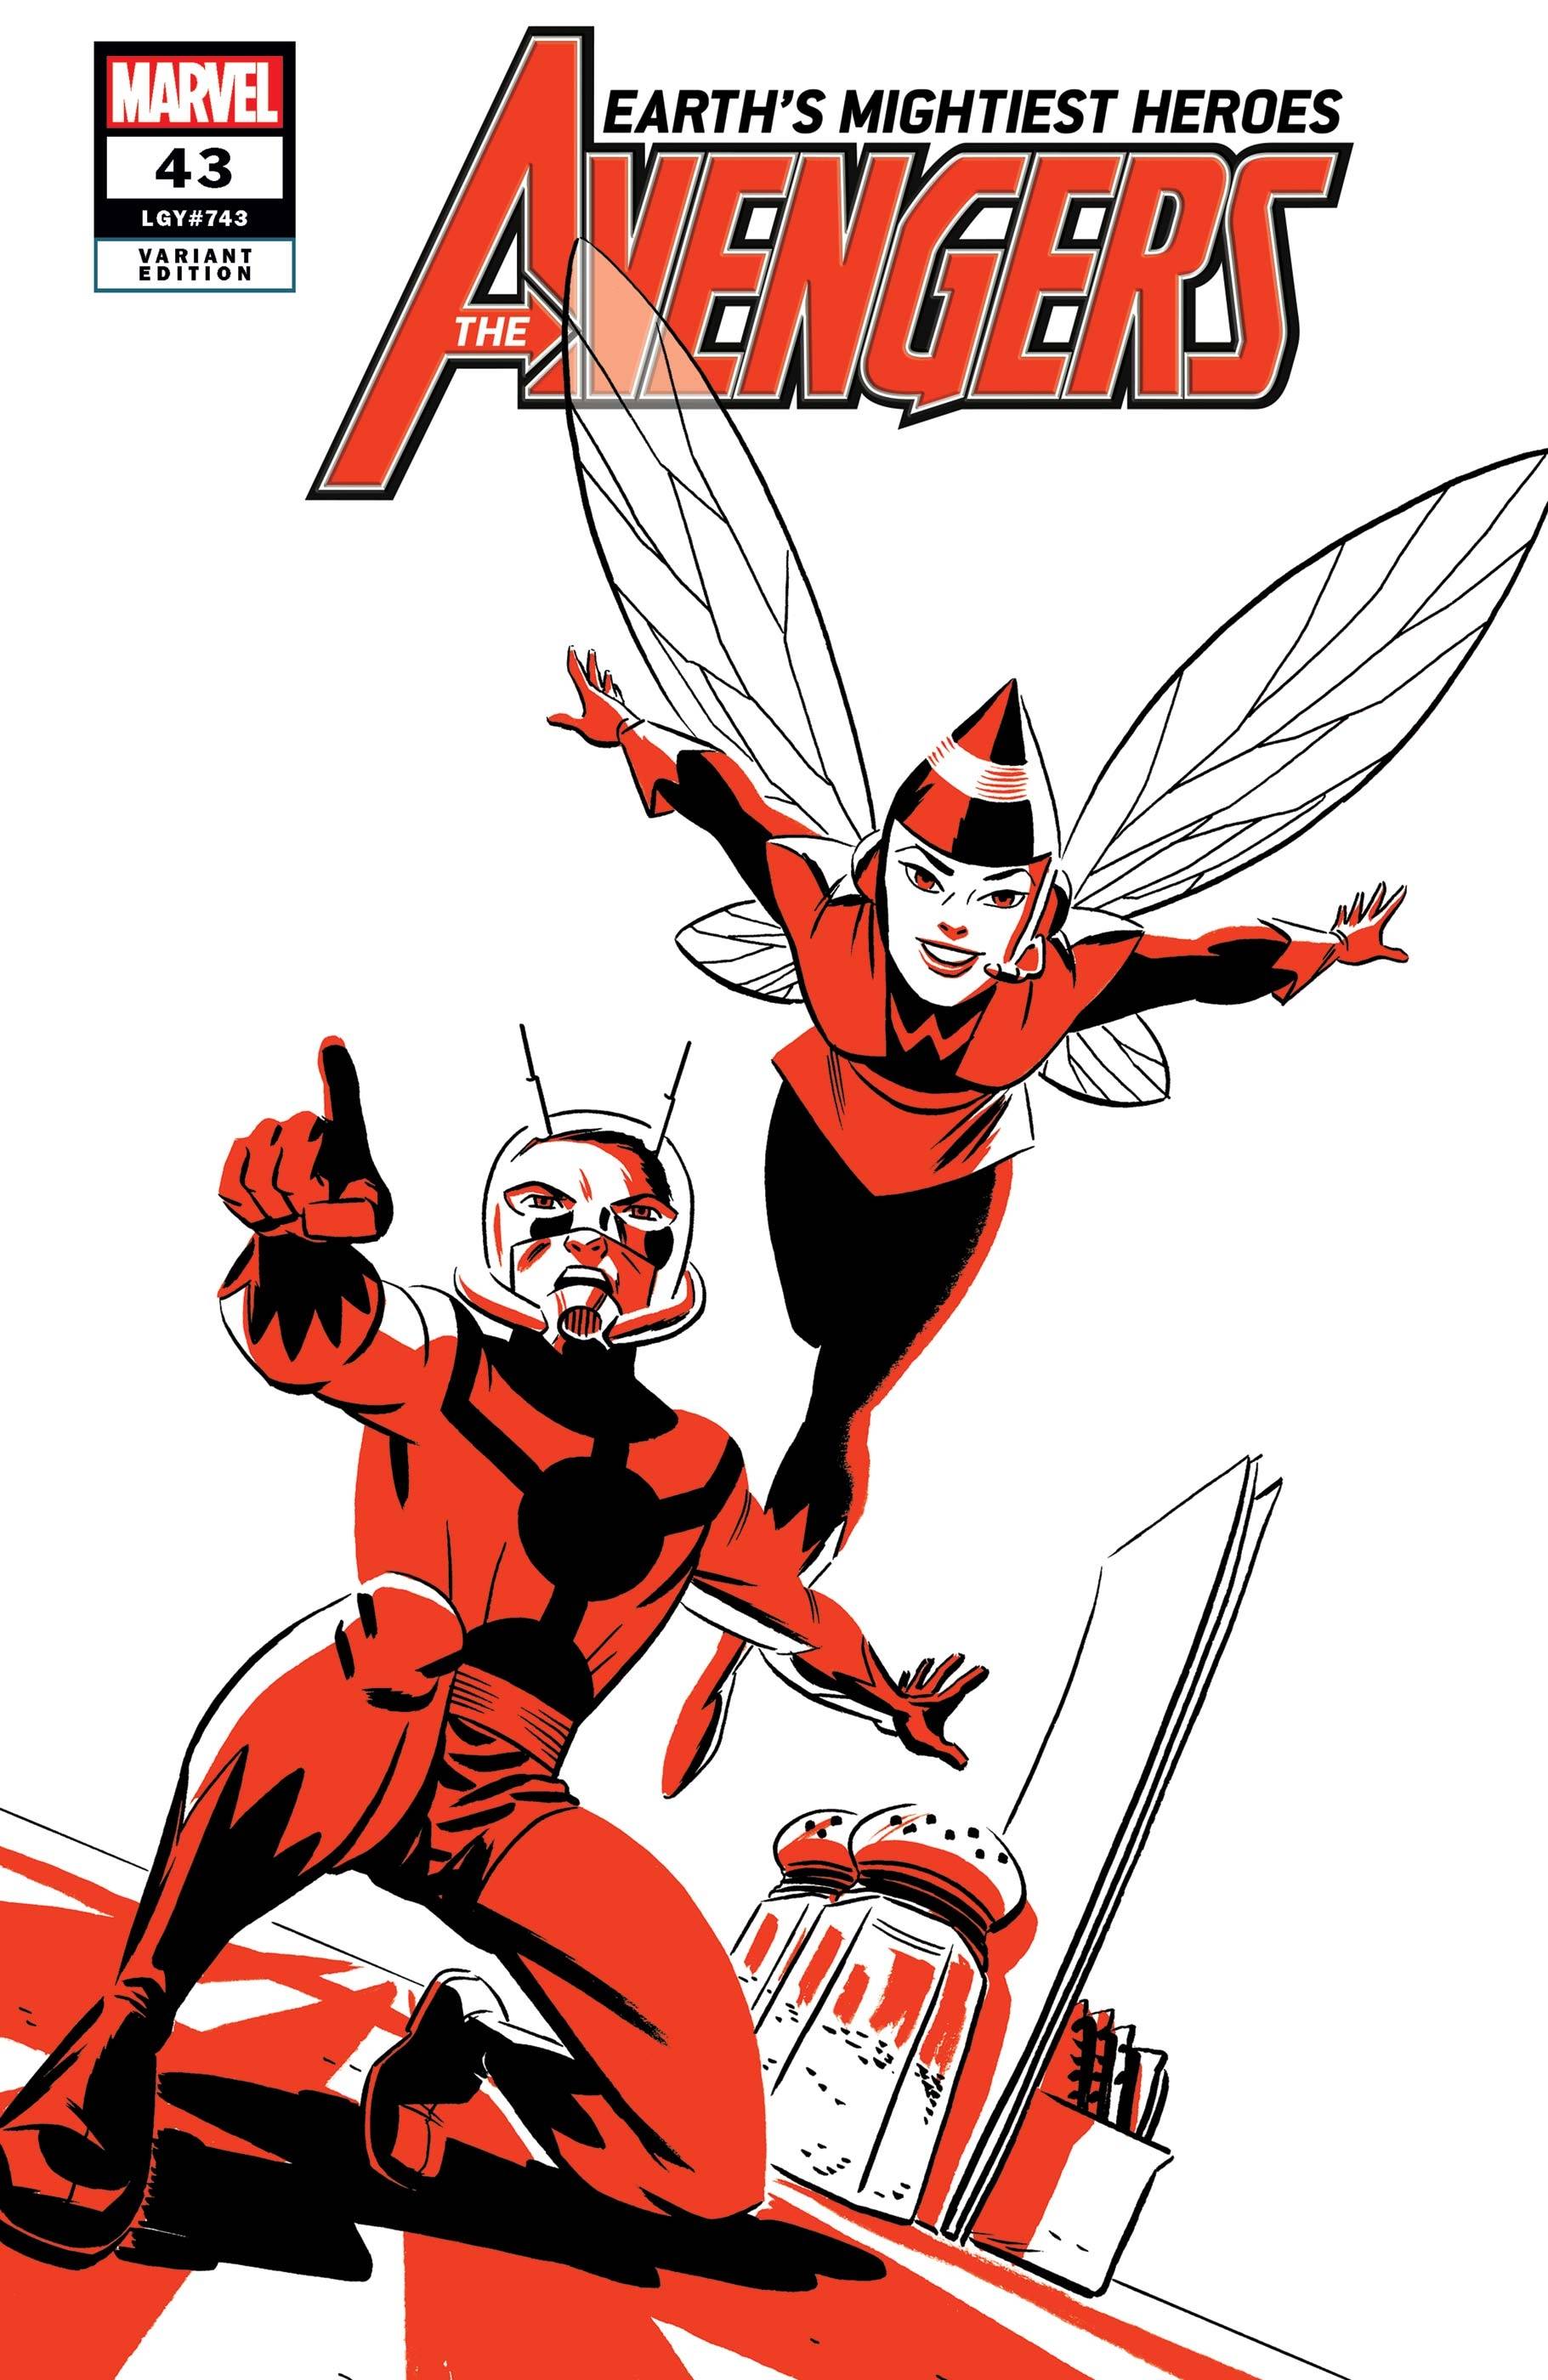 AVENGERS #43 ANT-MAN AND WASP TWO-TONE VAR